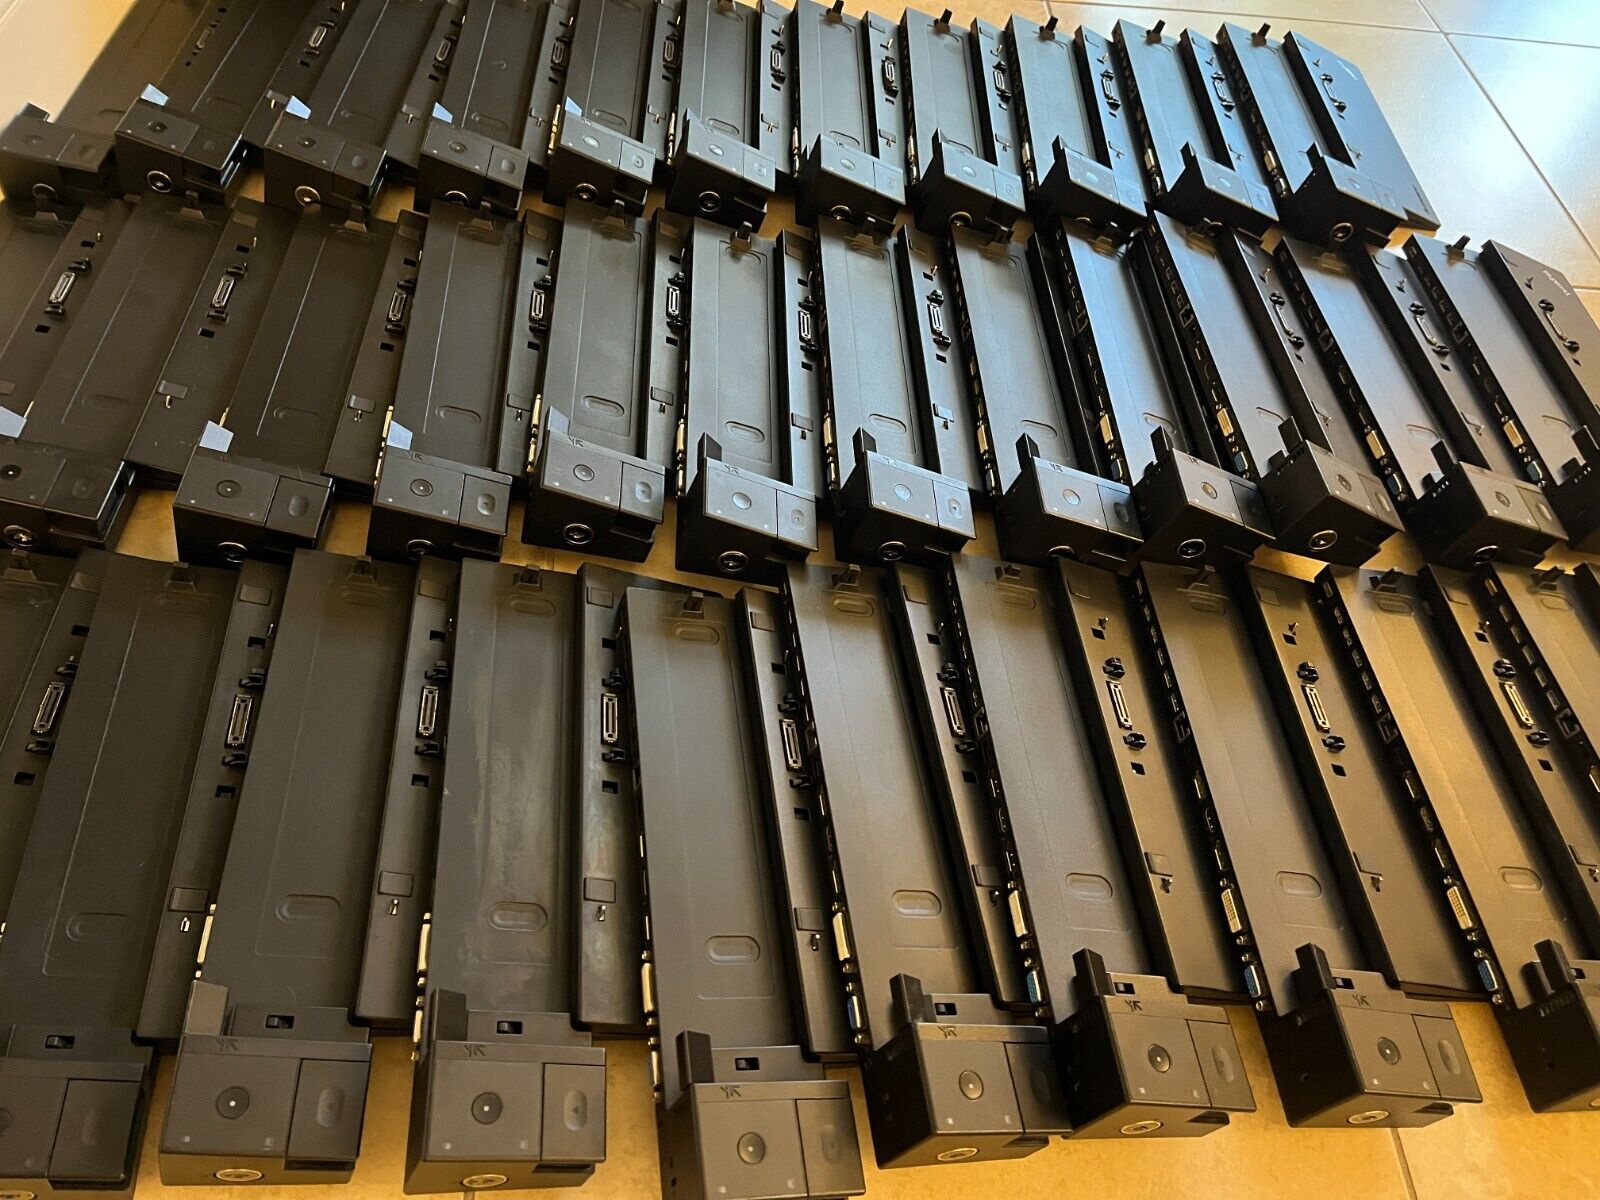 Lot of (34) Lenovo ThinkPad Ultra Dock 40A2 for T460 T540 W540 Docking Station